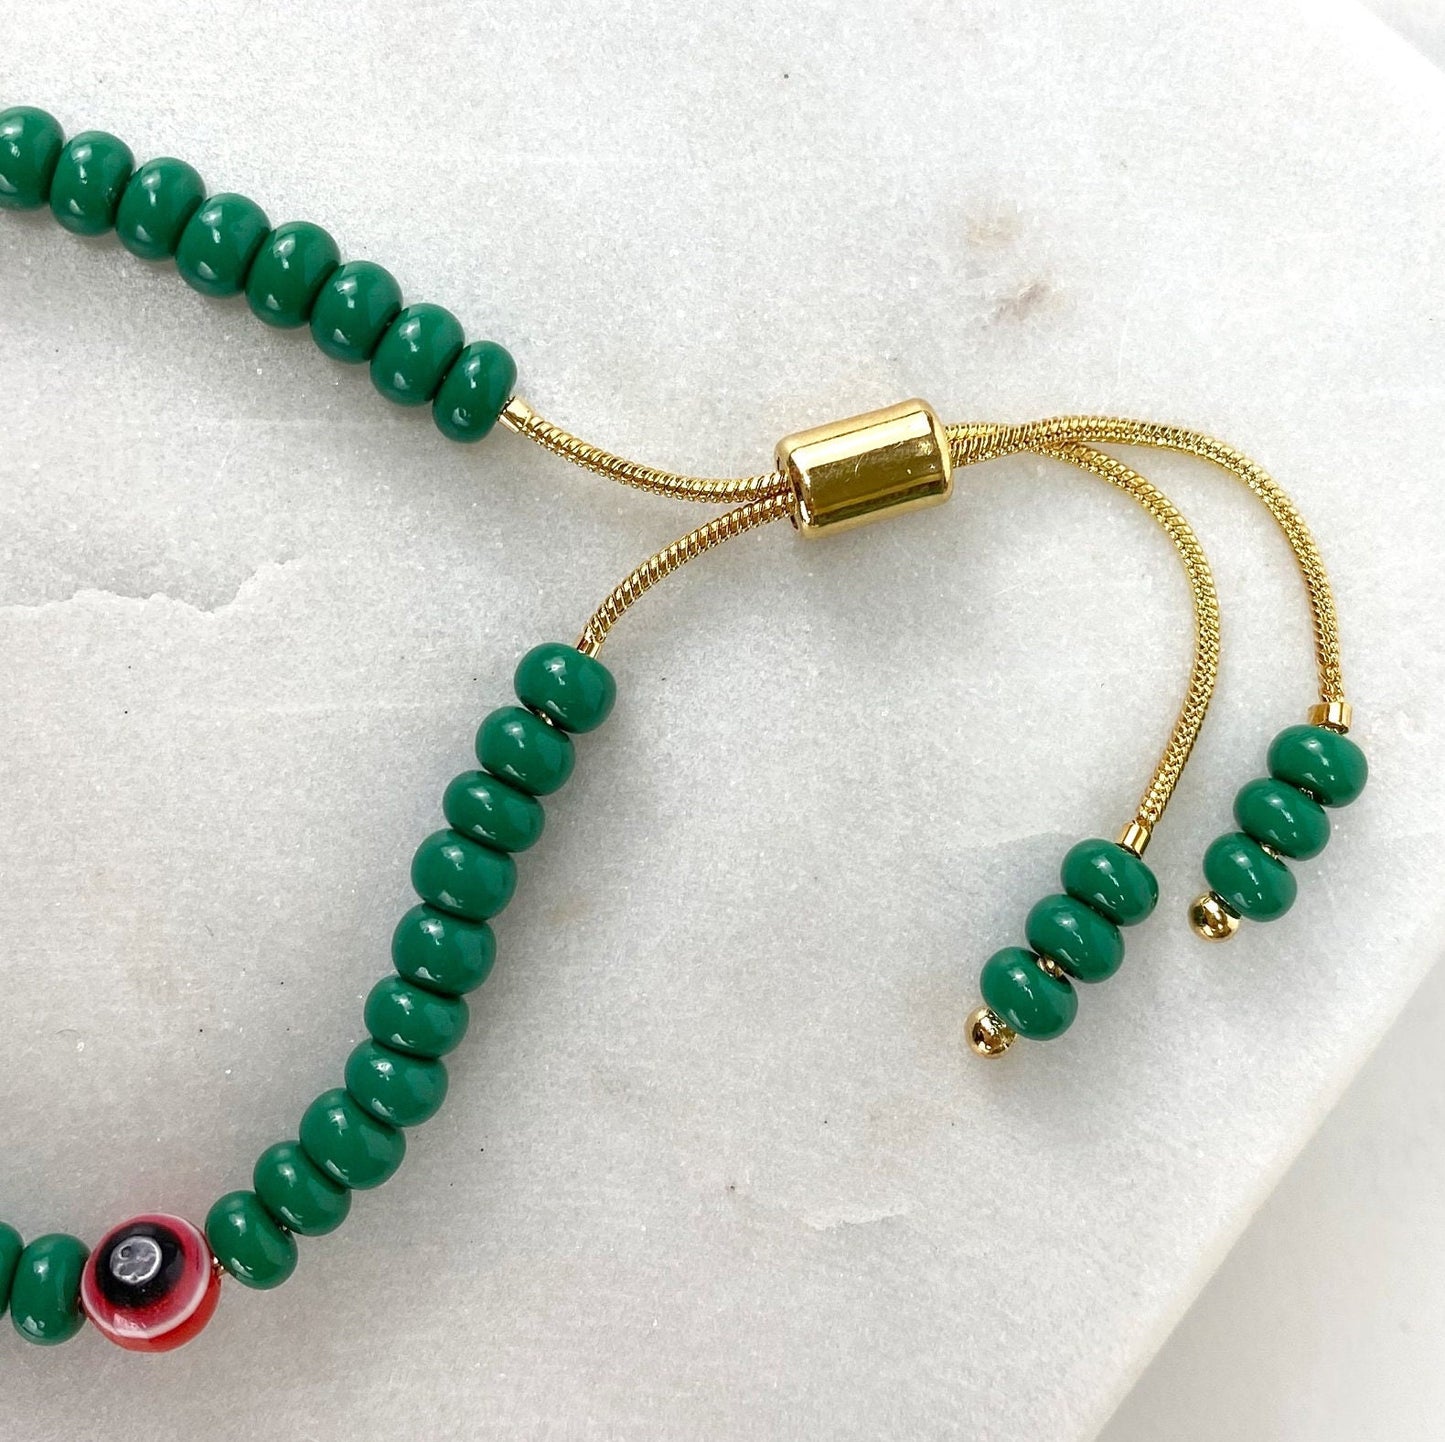 18k Gold Filled 1mm Snake Chain, Green Beads & Red Evil Eyes, Colored Adjustable Bracelet Wholesale Jewelry Supplies